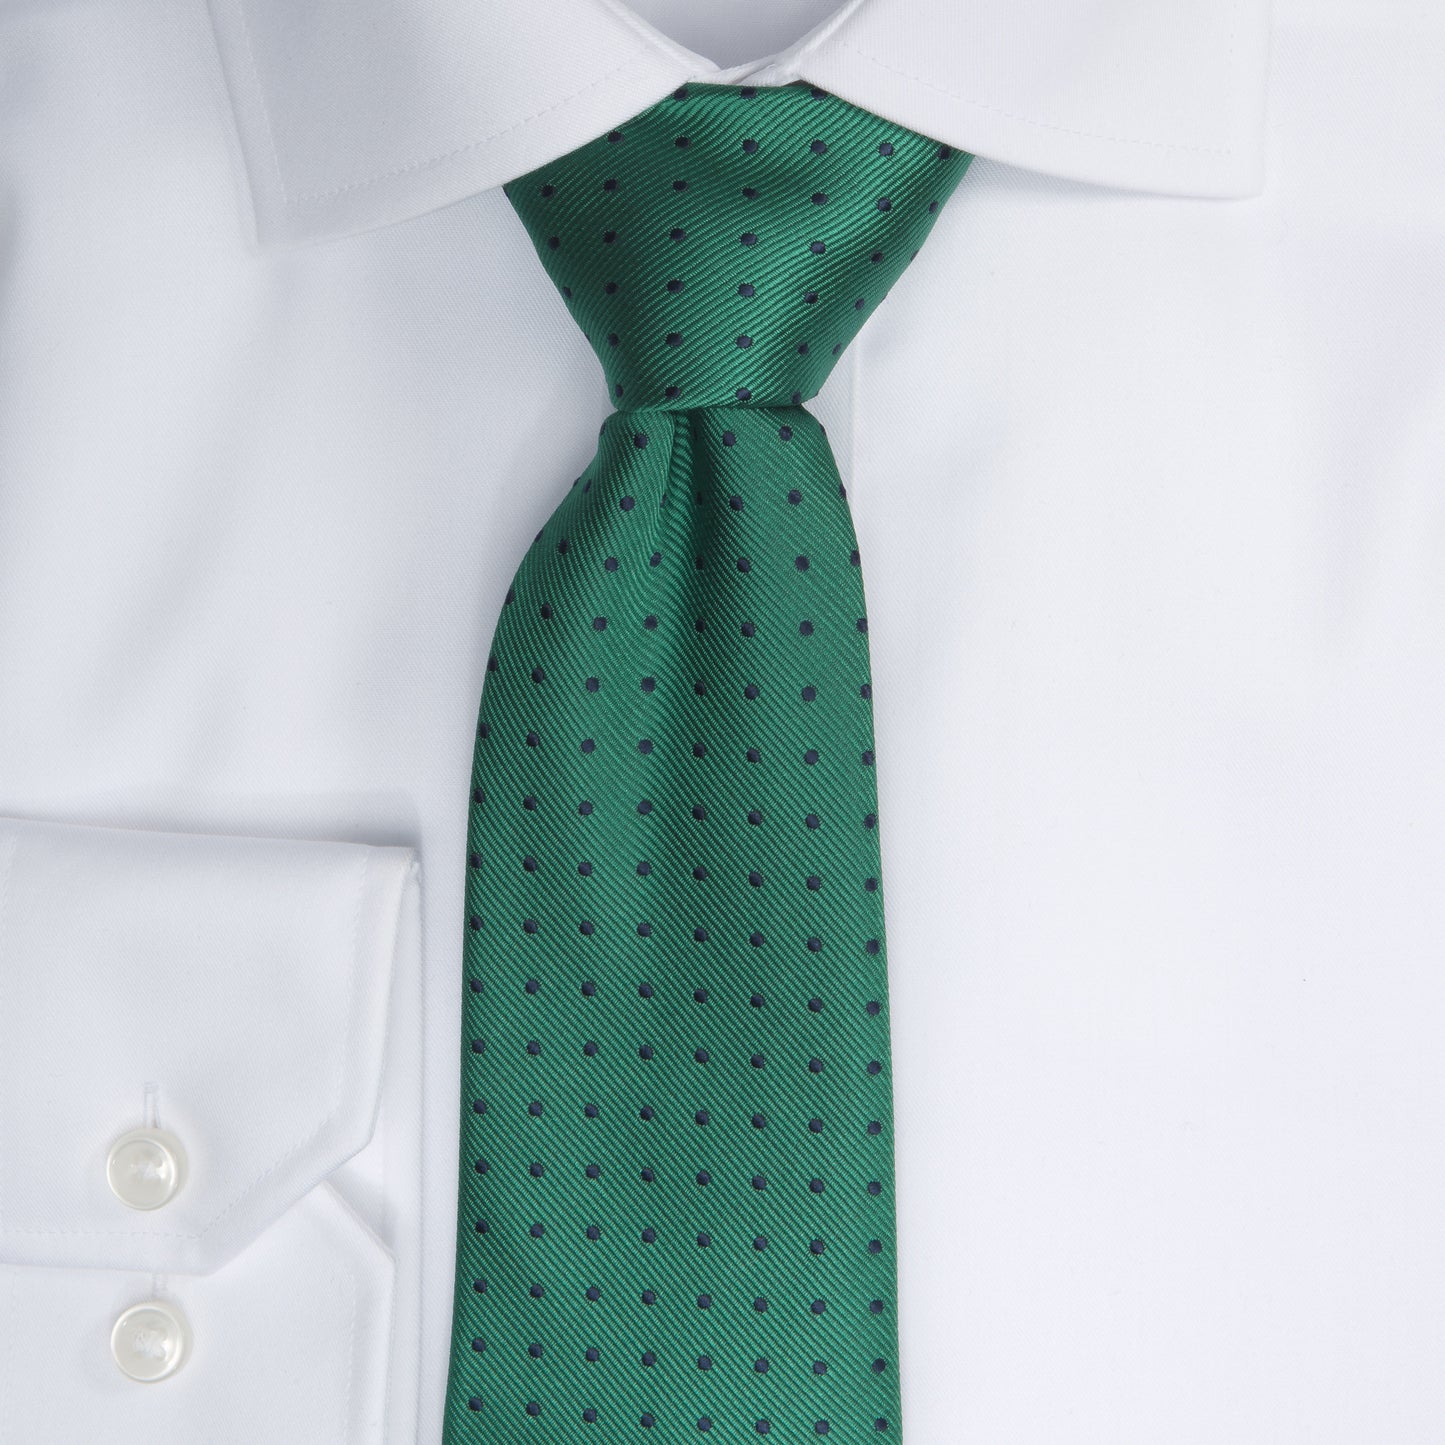 Dotted Tie - 706 green/navy